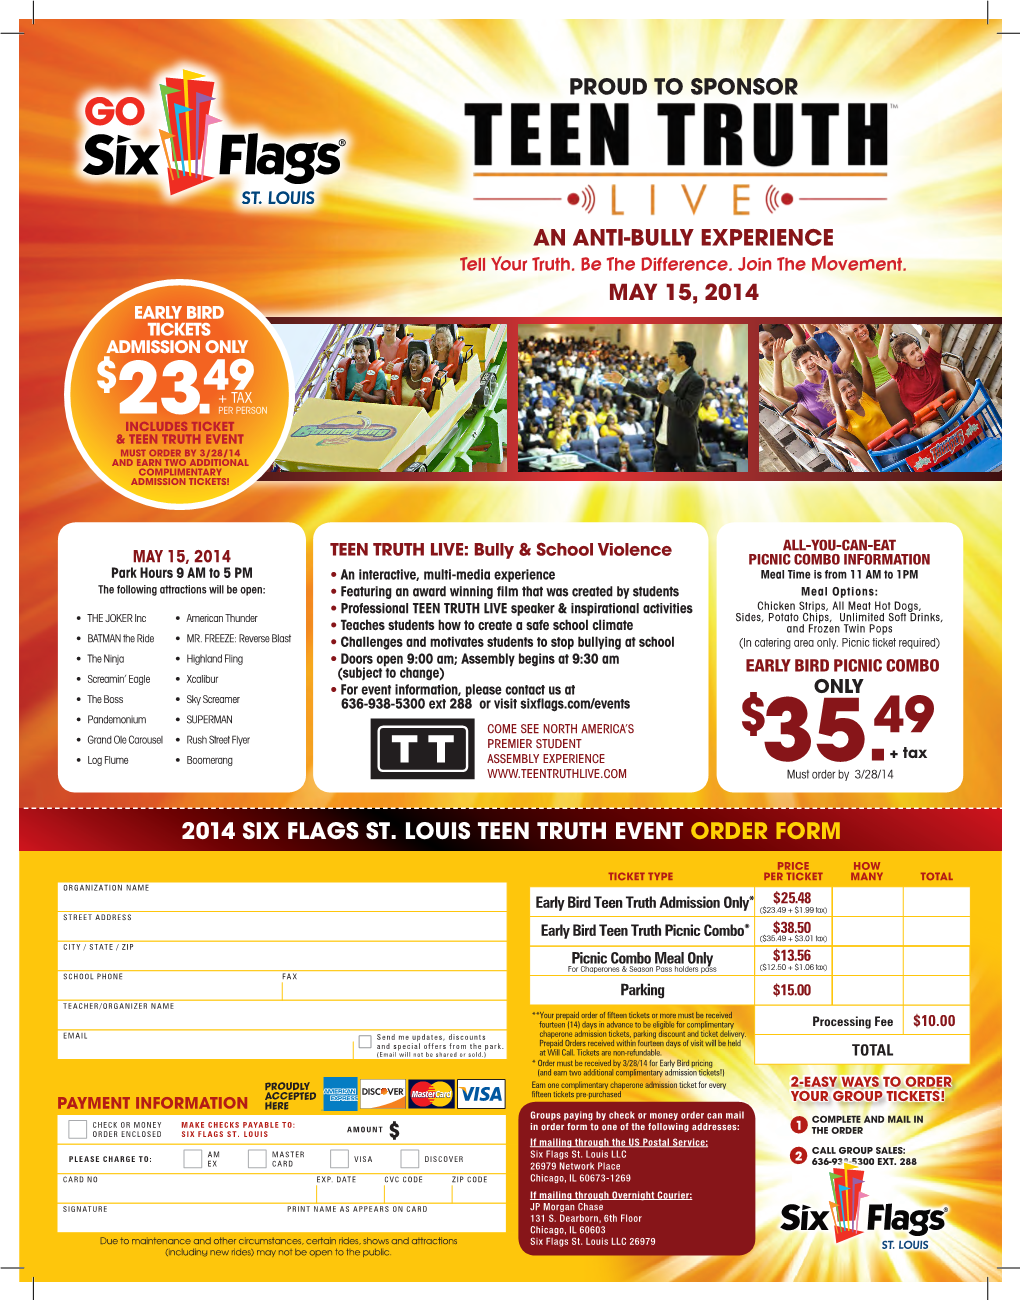 Proud to Sponsor an Anti-Bully Experience May 15, 2014 2014 Six Flags St. Louis Teen Truth Event Order Form